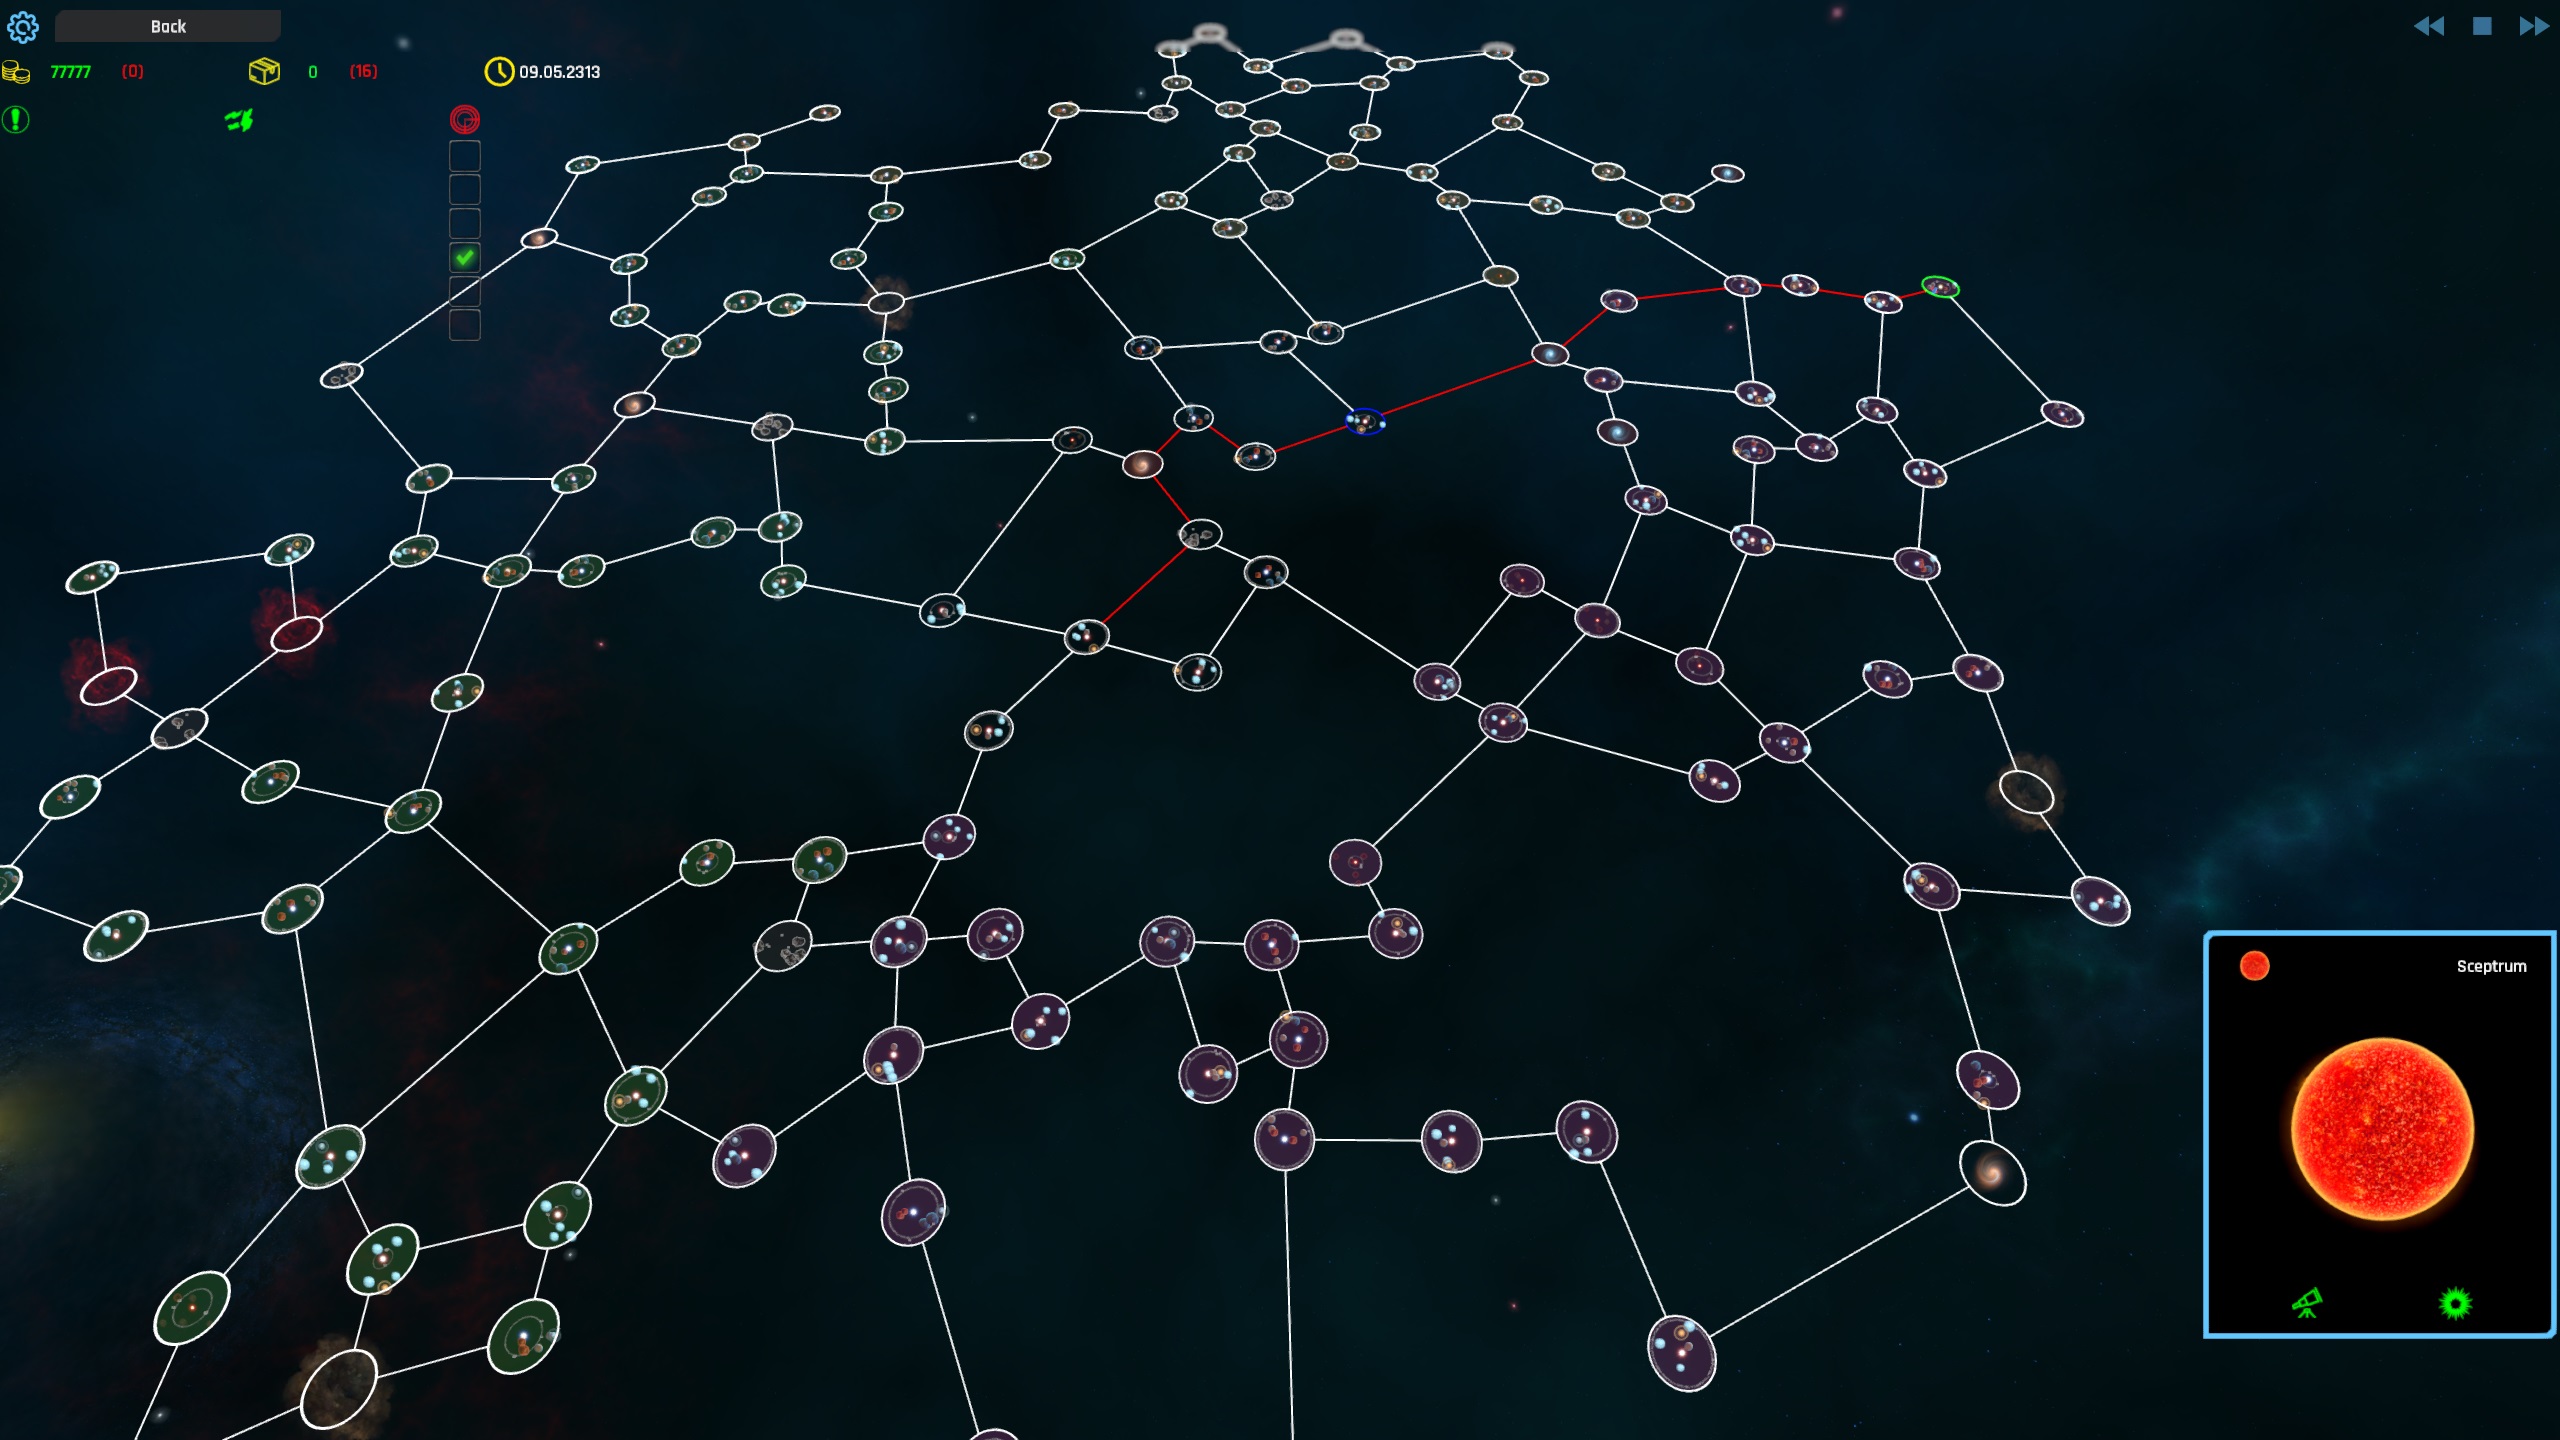 The galaxy with star lane map switched on